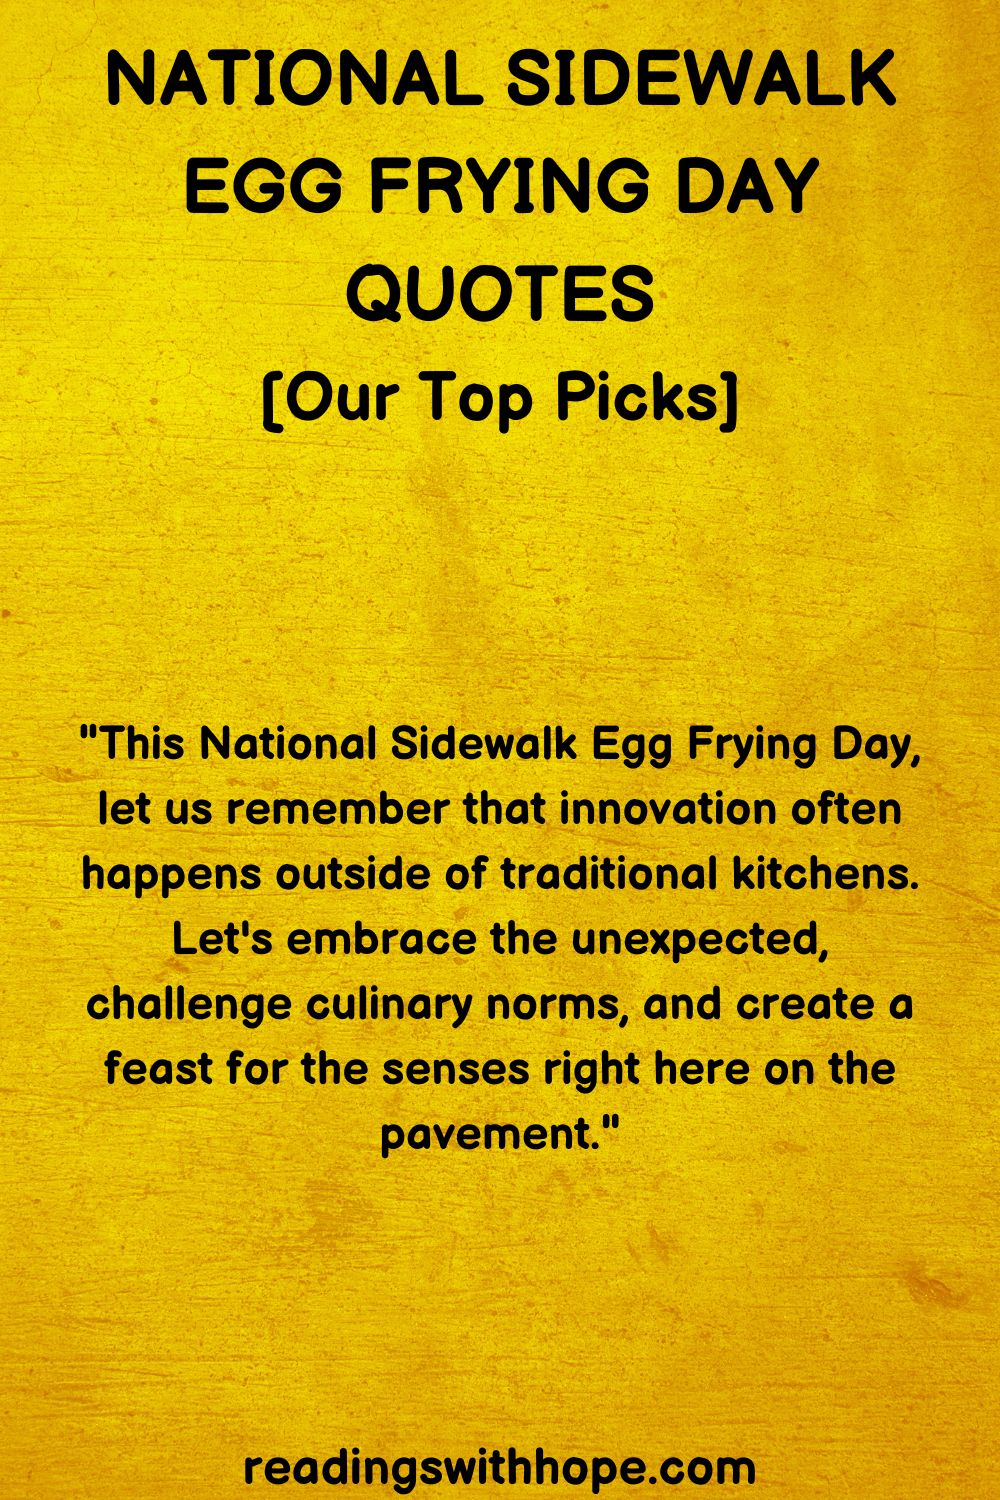 30 National Sidewalk Egg Frying Day Quotes and Messages